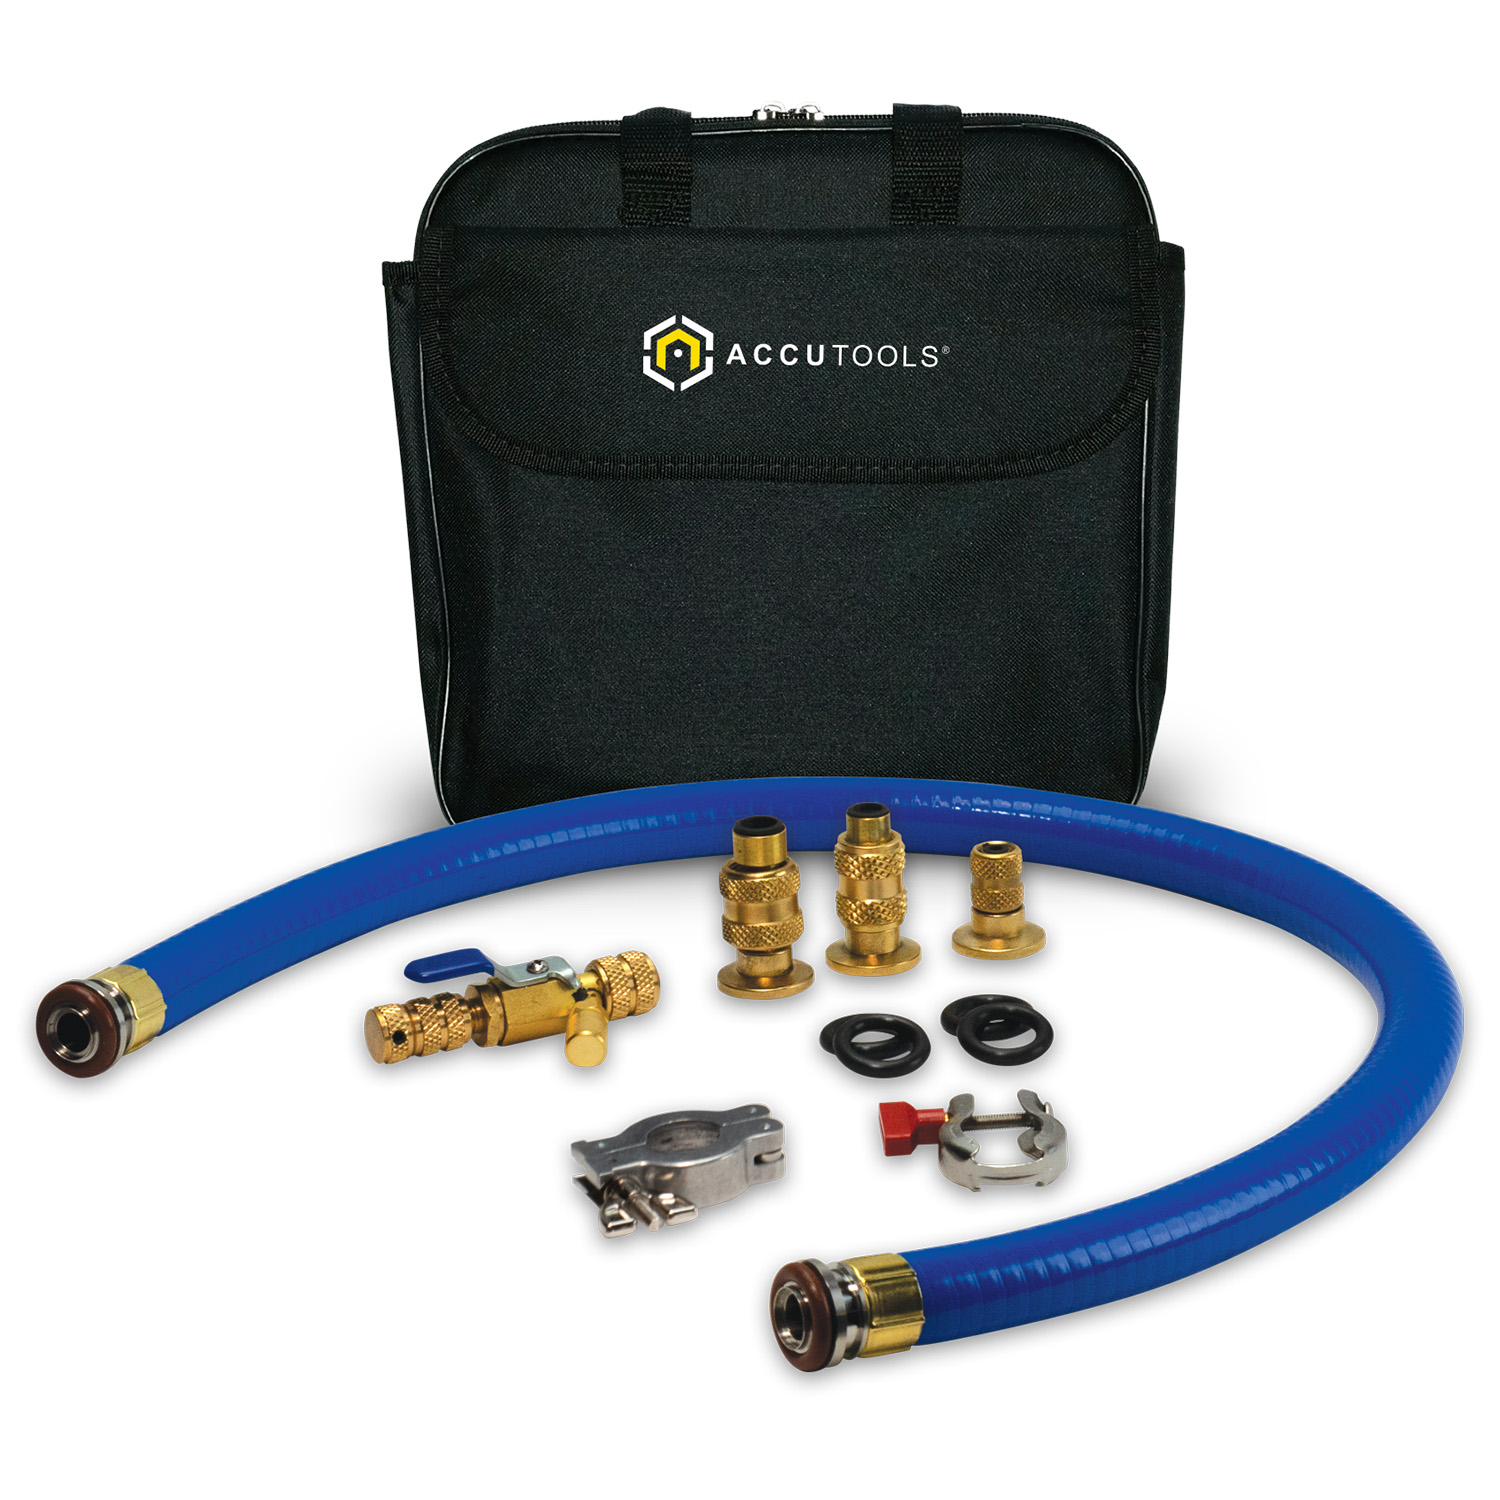 TruBlue Starter XL Kit by Accutools USA - Hi Perfomance Hose for Vacuum Pumps - internal diameter ¾ (with adapters and accessories)